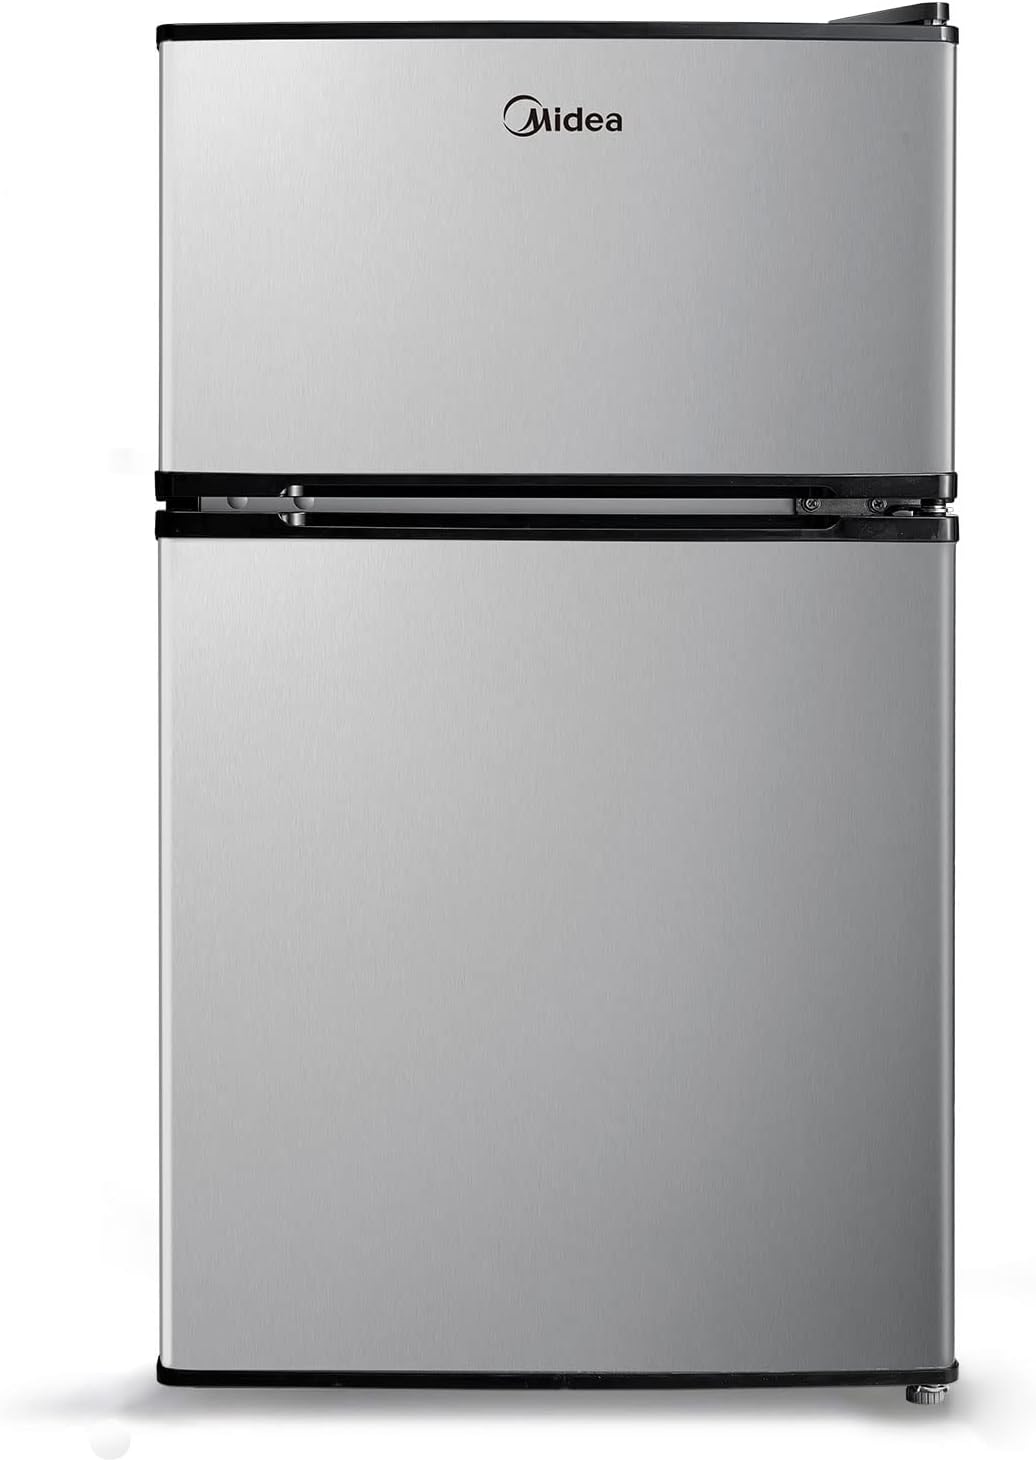 Midea 13.8-Cu. Ft. Upright Convertible Freezer in Stainless Steel